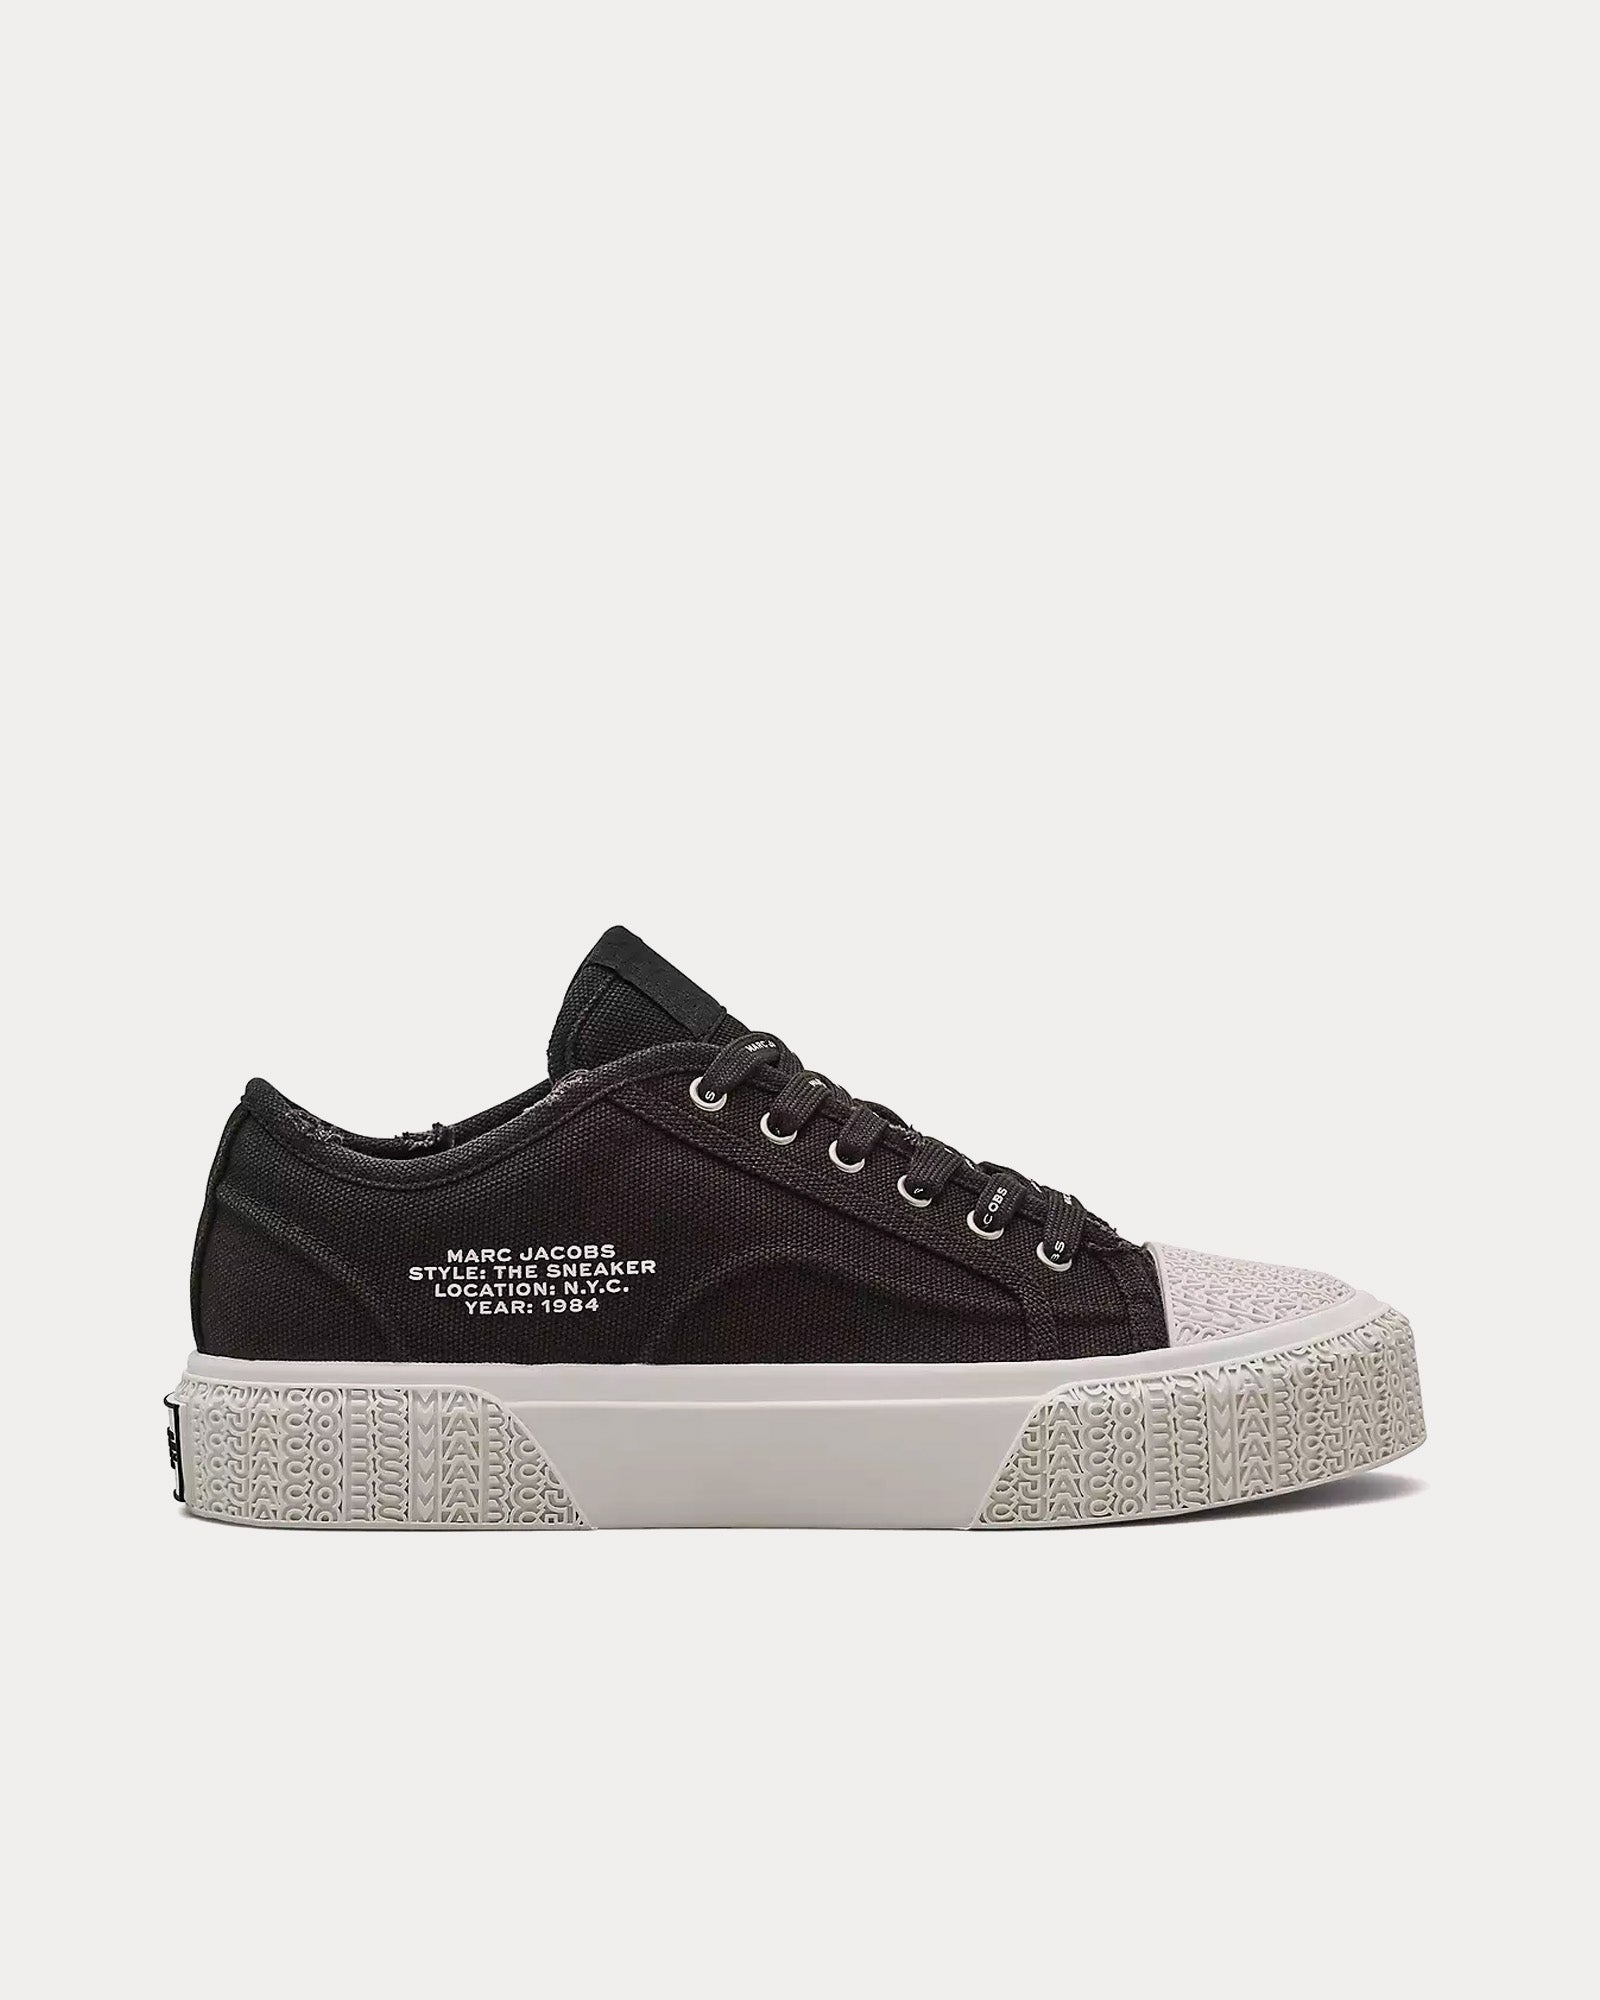 Marc Jacobs - The Sneaker Black / White Low Top Sneakers